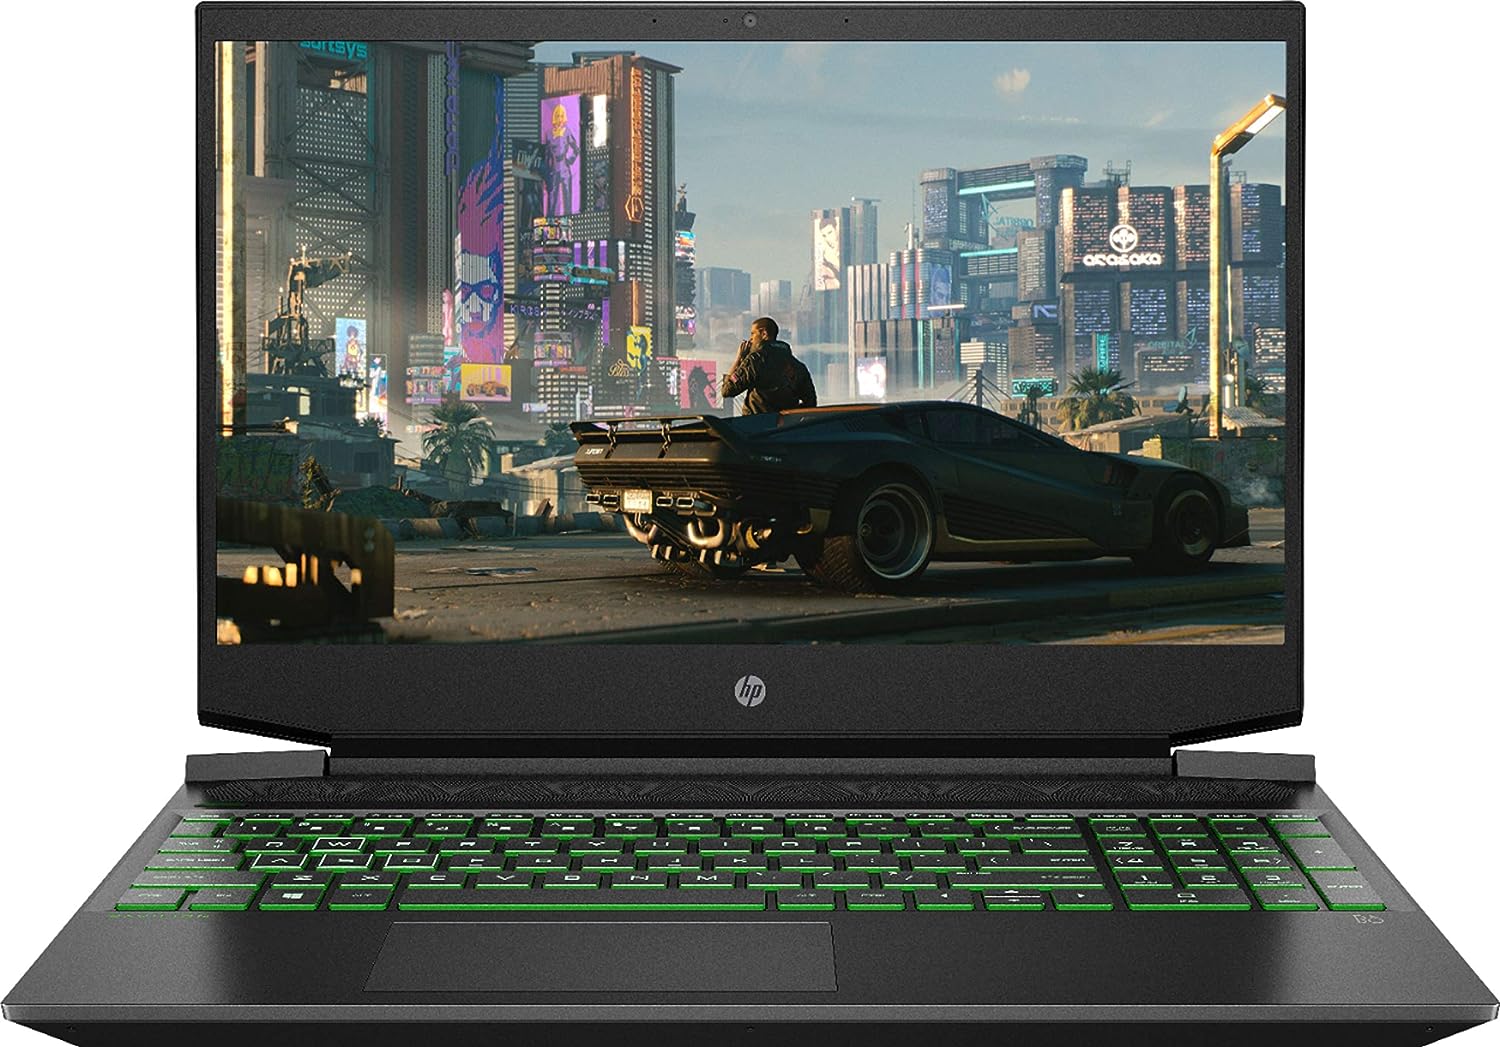 HP Pavilion 15.6inch Gaming Laptop Review